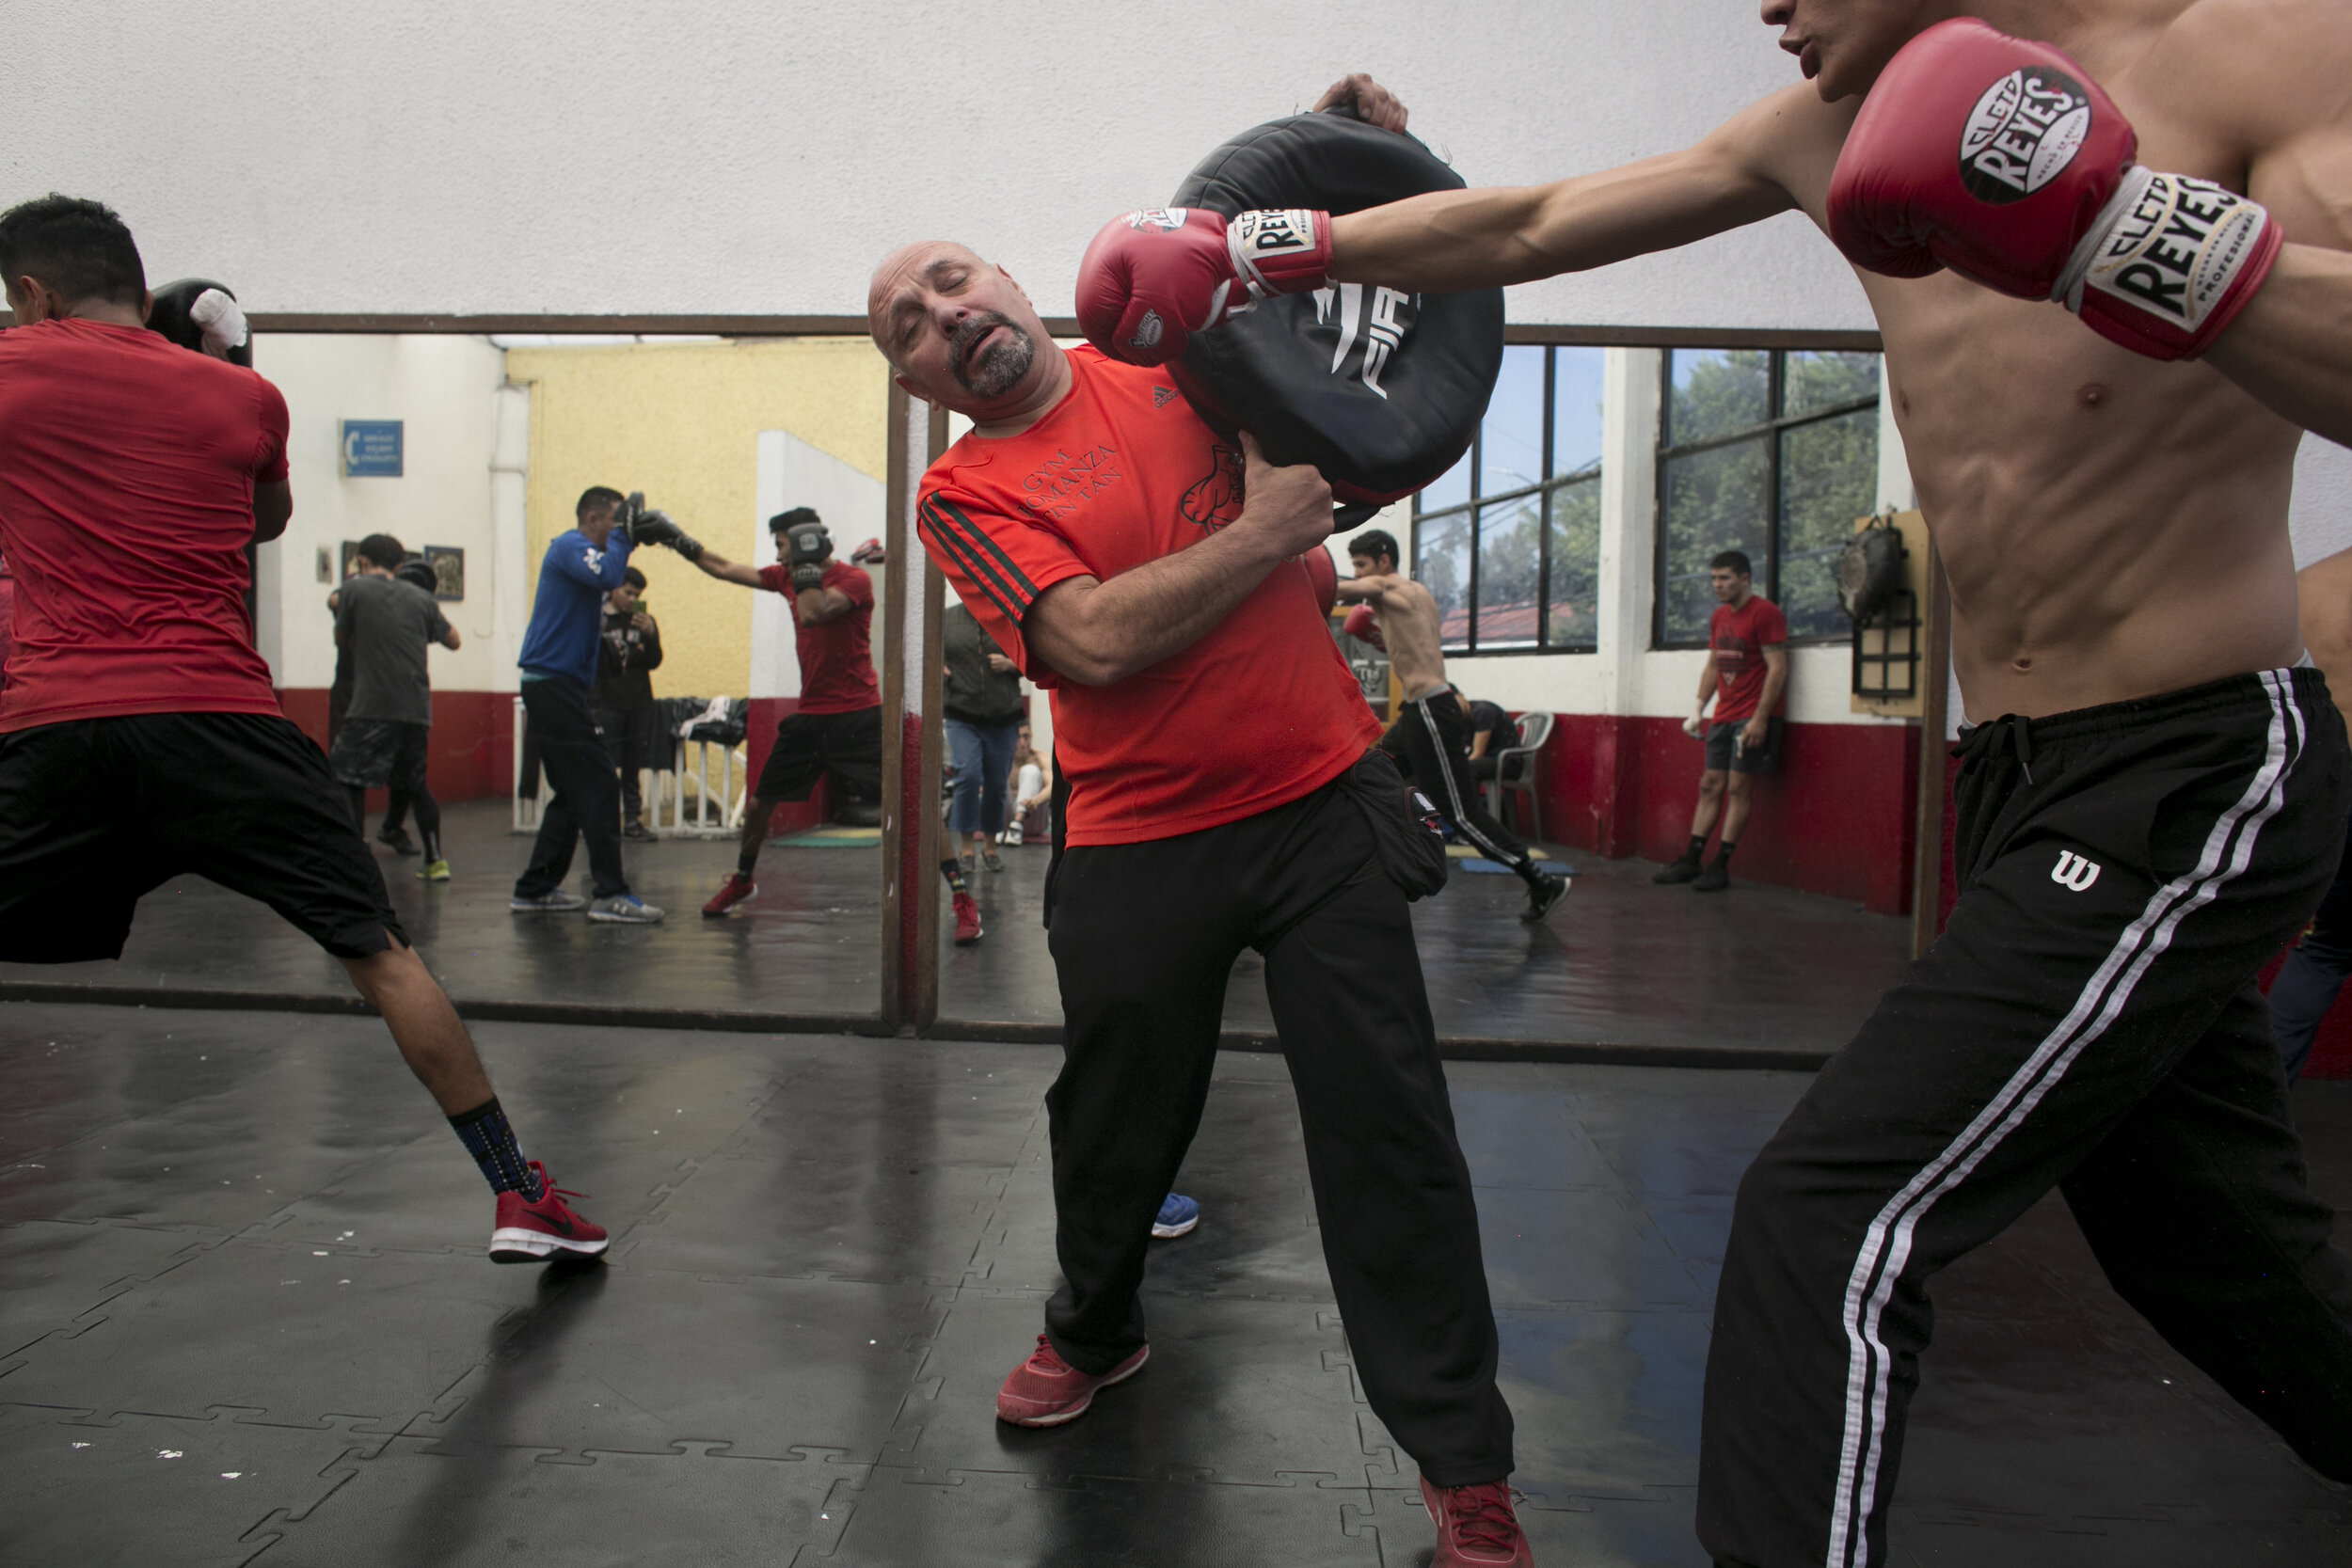  “All the guys come in here thinking they’re going to be the next Juan Maneul Marquez, but there’s 200 guys in here and probably none of them are going to be Marquez,” said trainer Oscar “Tin Tan” Perez, “I make sure they go to school.” Tin Tan sparr